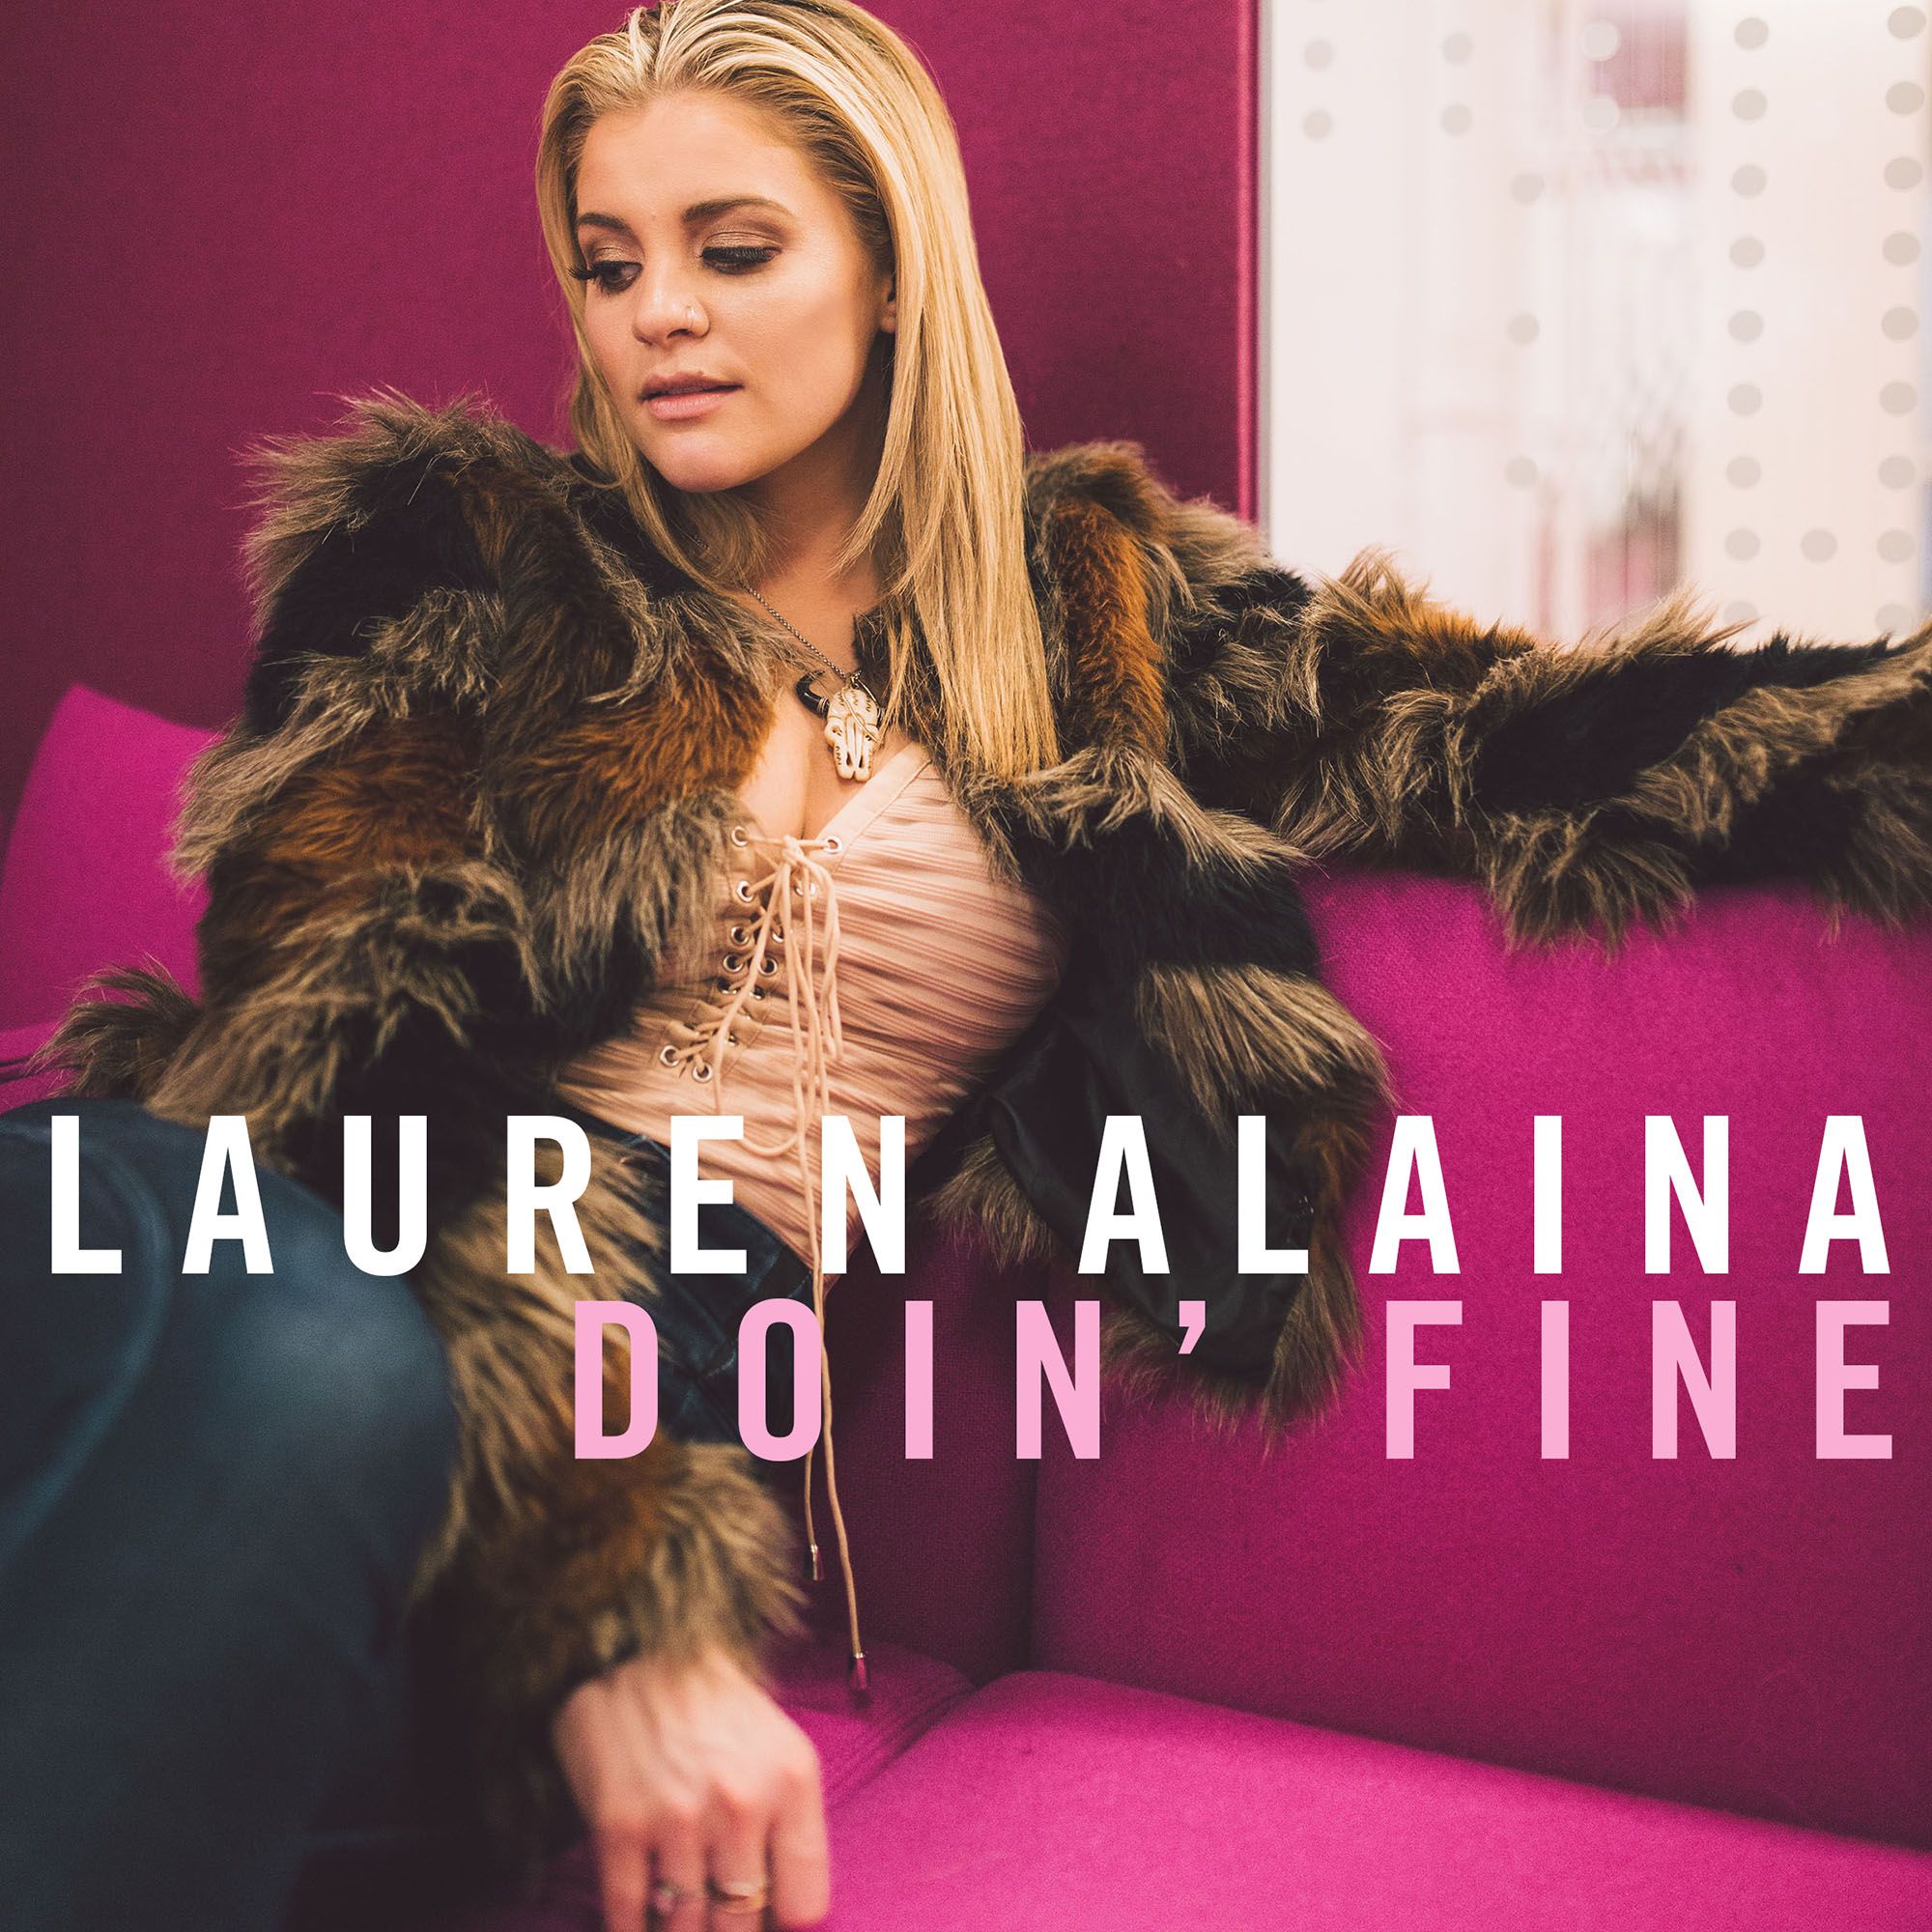 LAUREN ALAINA RELEASES MUSIC VIDEO FOR LATEST SINGLE “DOIN’ FINE” – OUT TODAY SEPT. 28